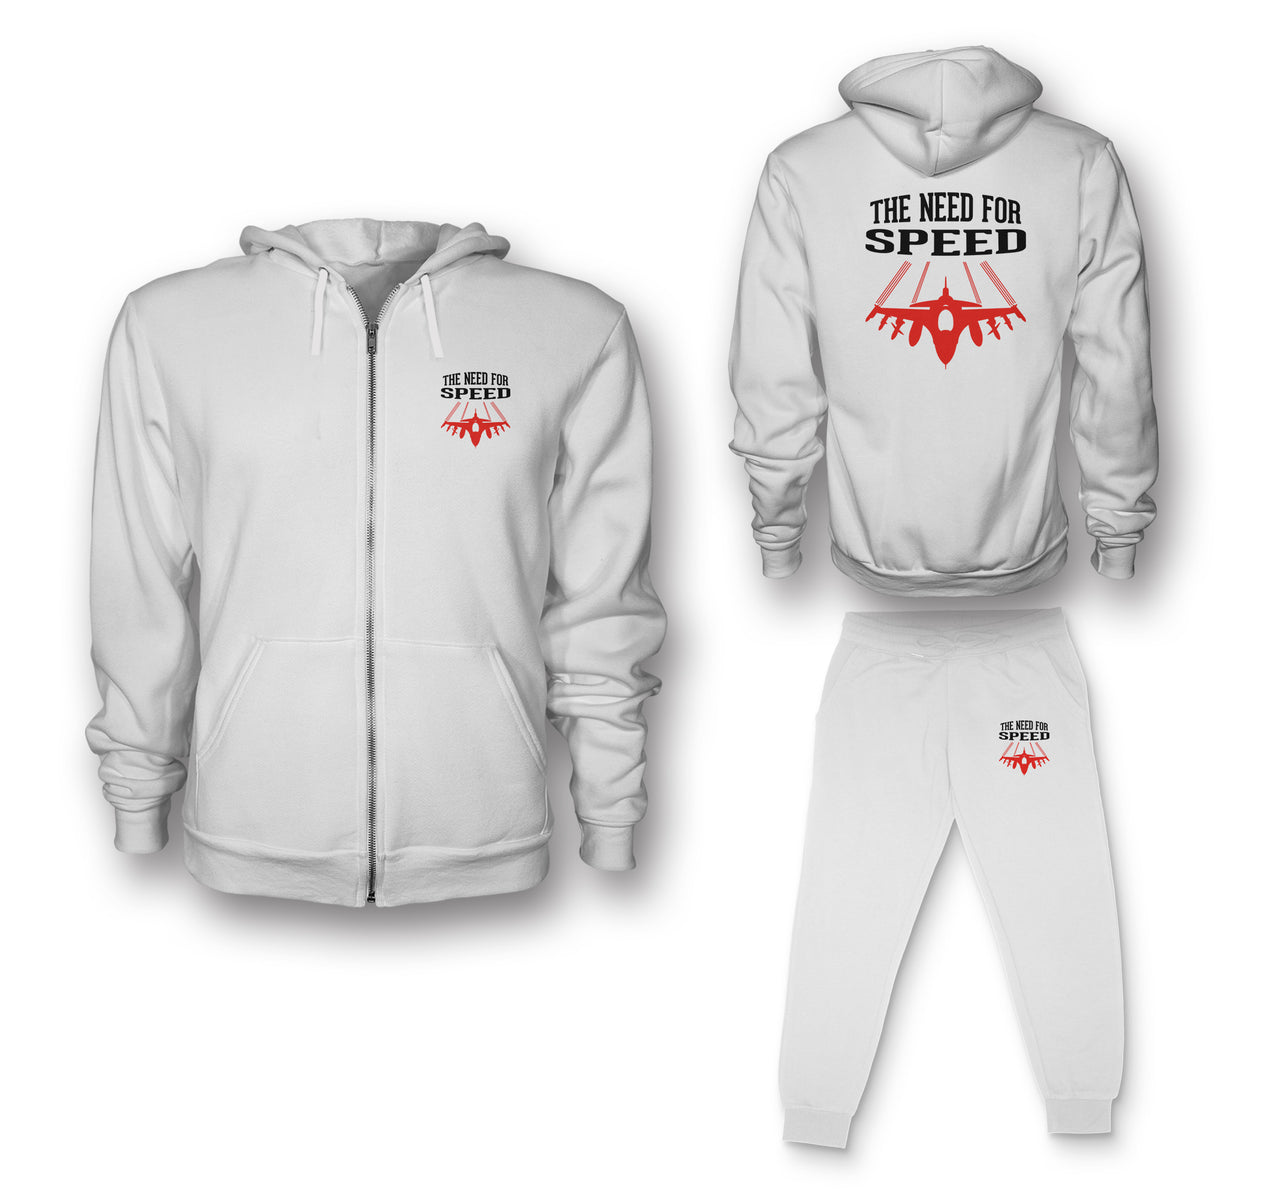 The Need For Speed Designed Zipped Hoodies & Sweatpants Set